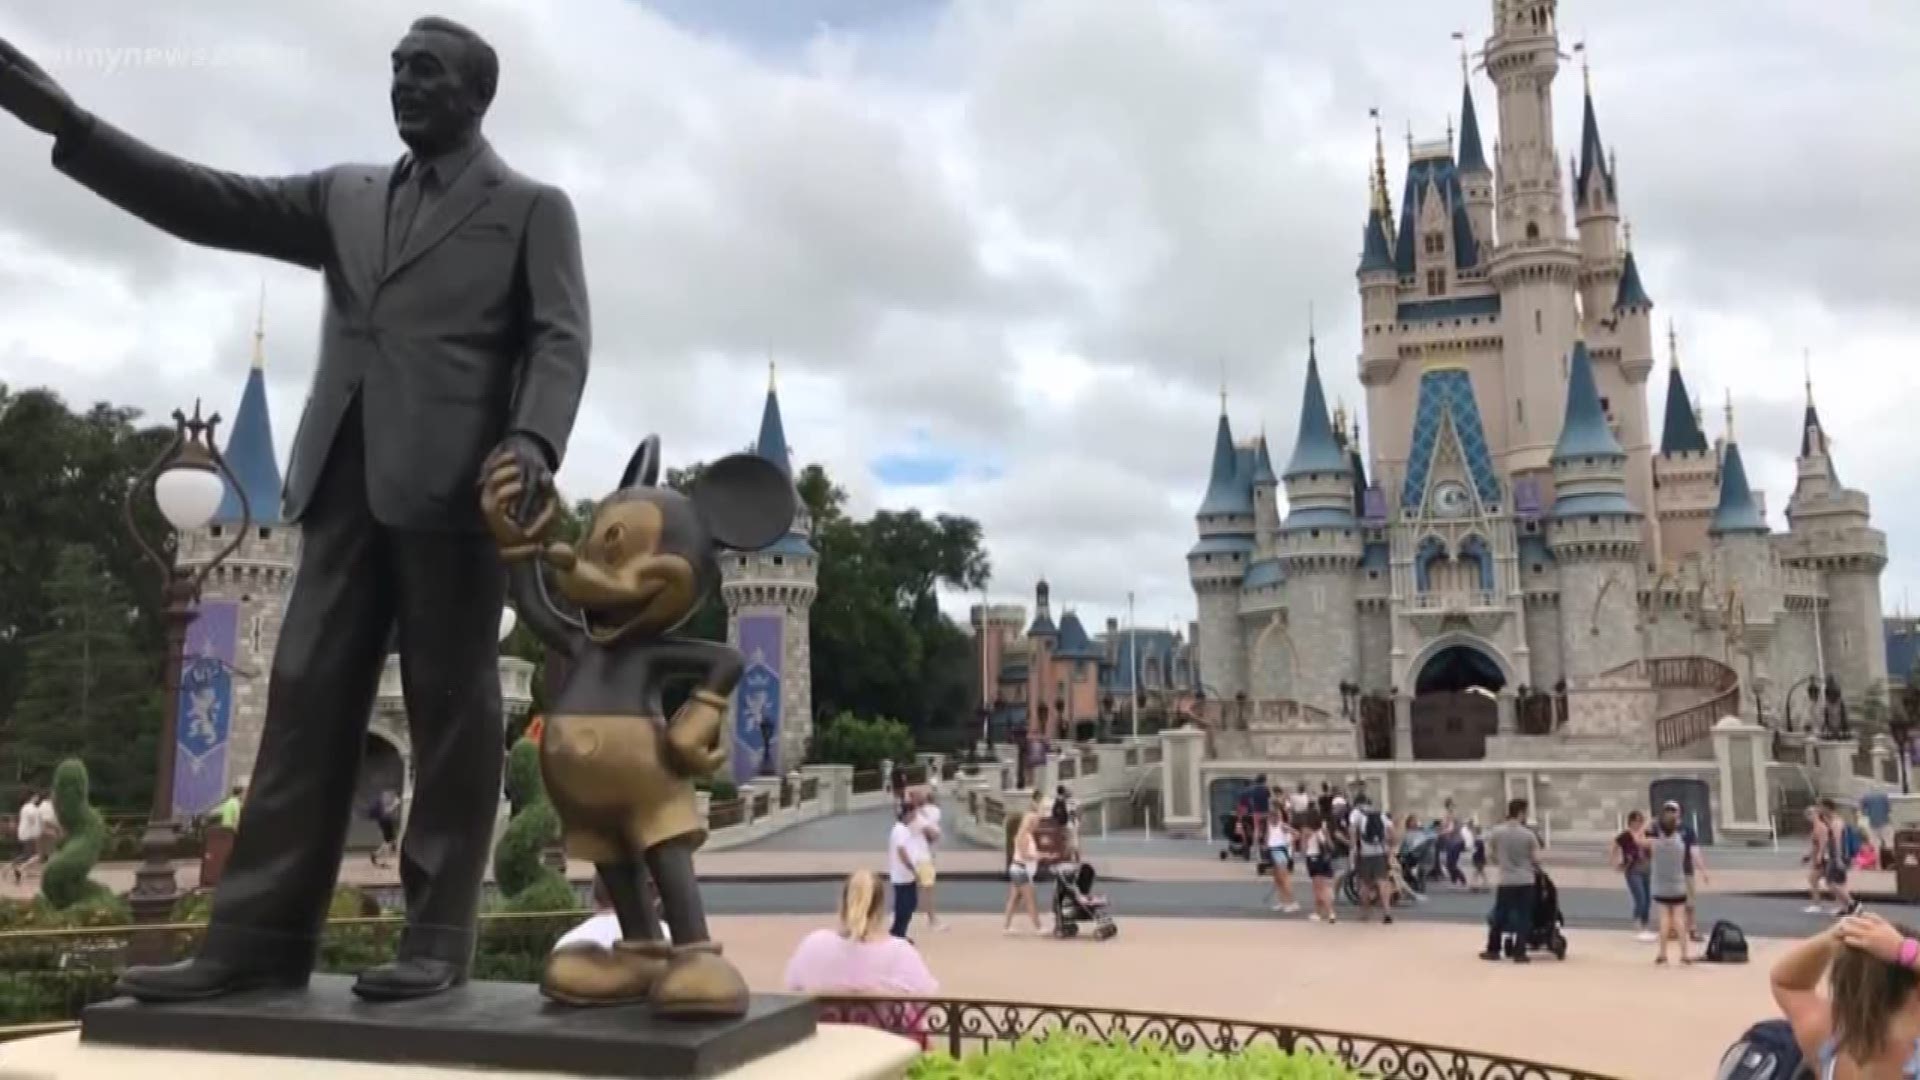 After a trip to Orlando, Florida-based Disney World, one angry mother took to Facebook to vent her frustration with childless millennials.